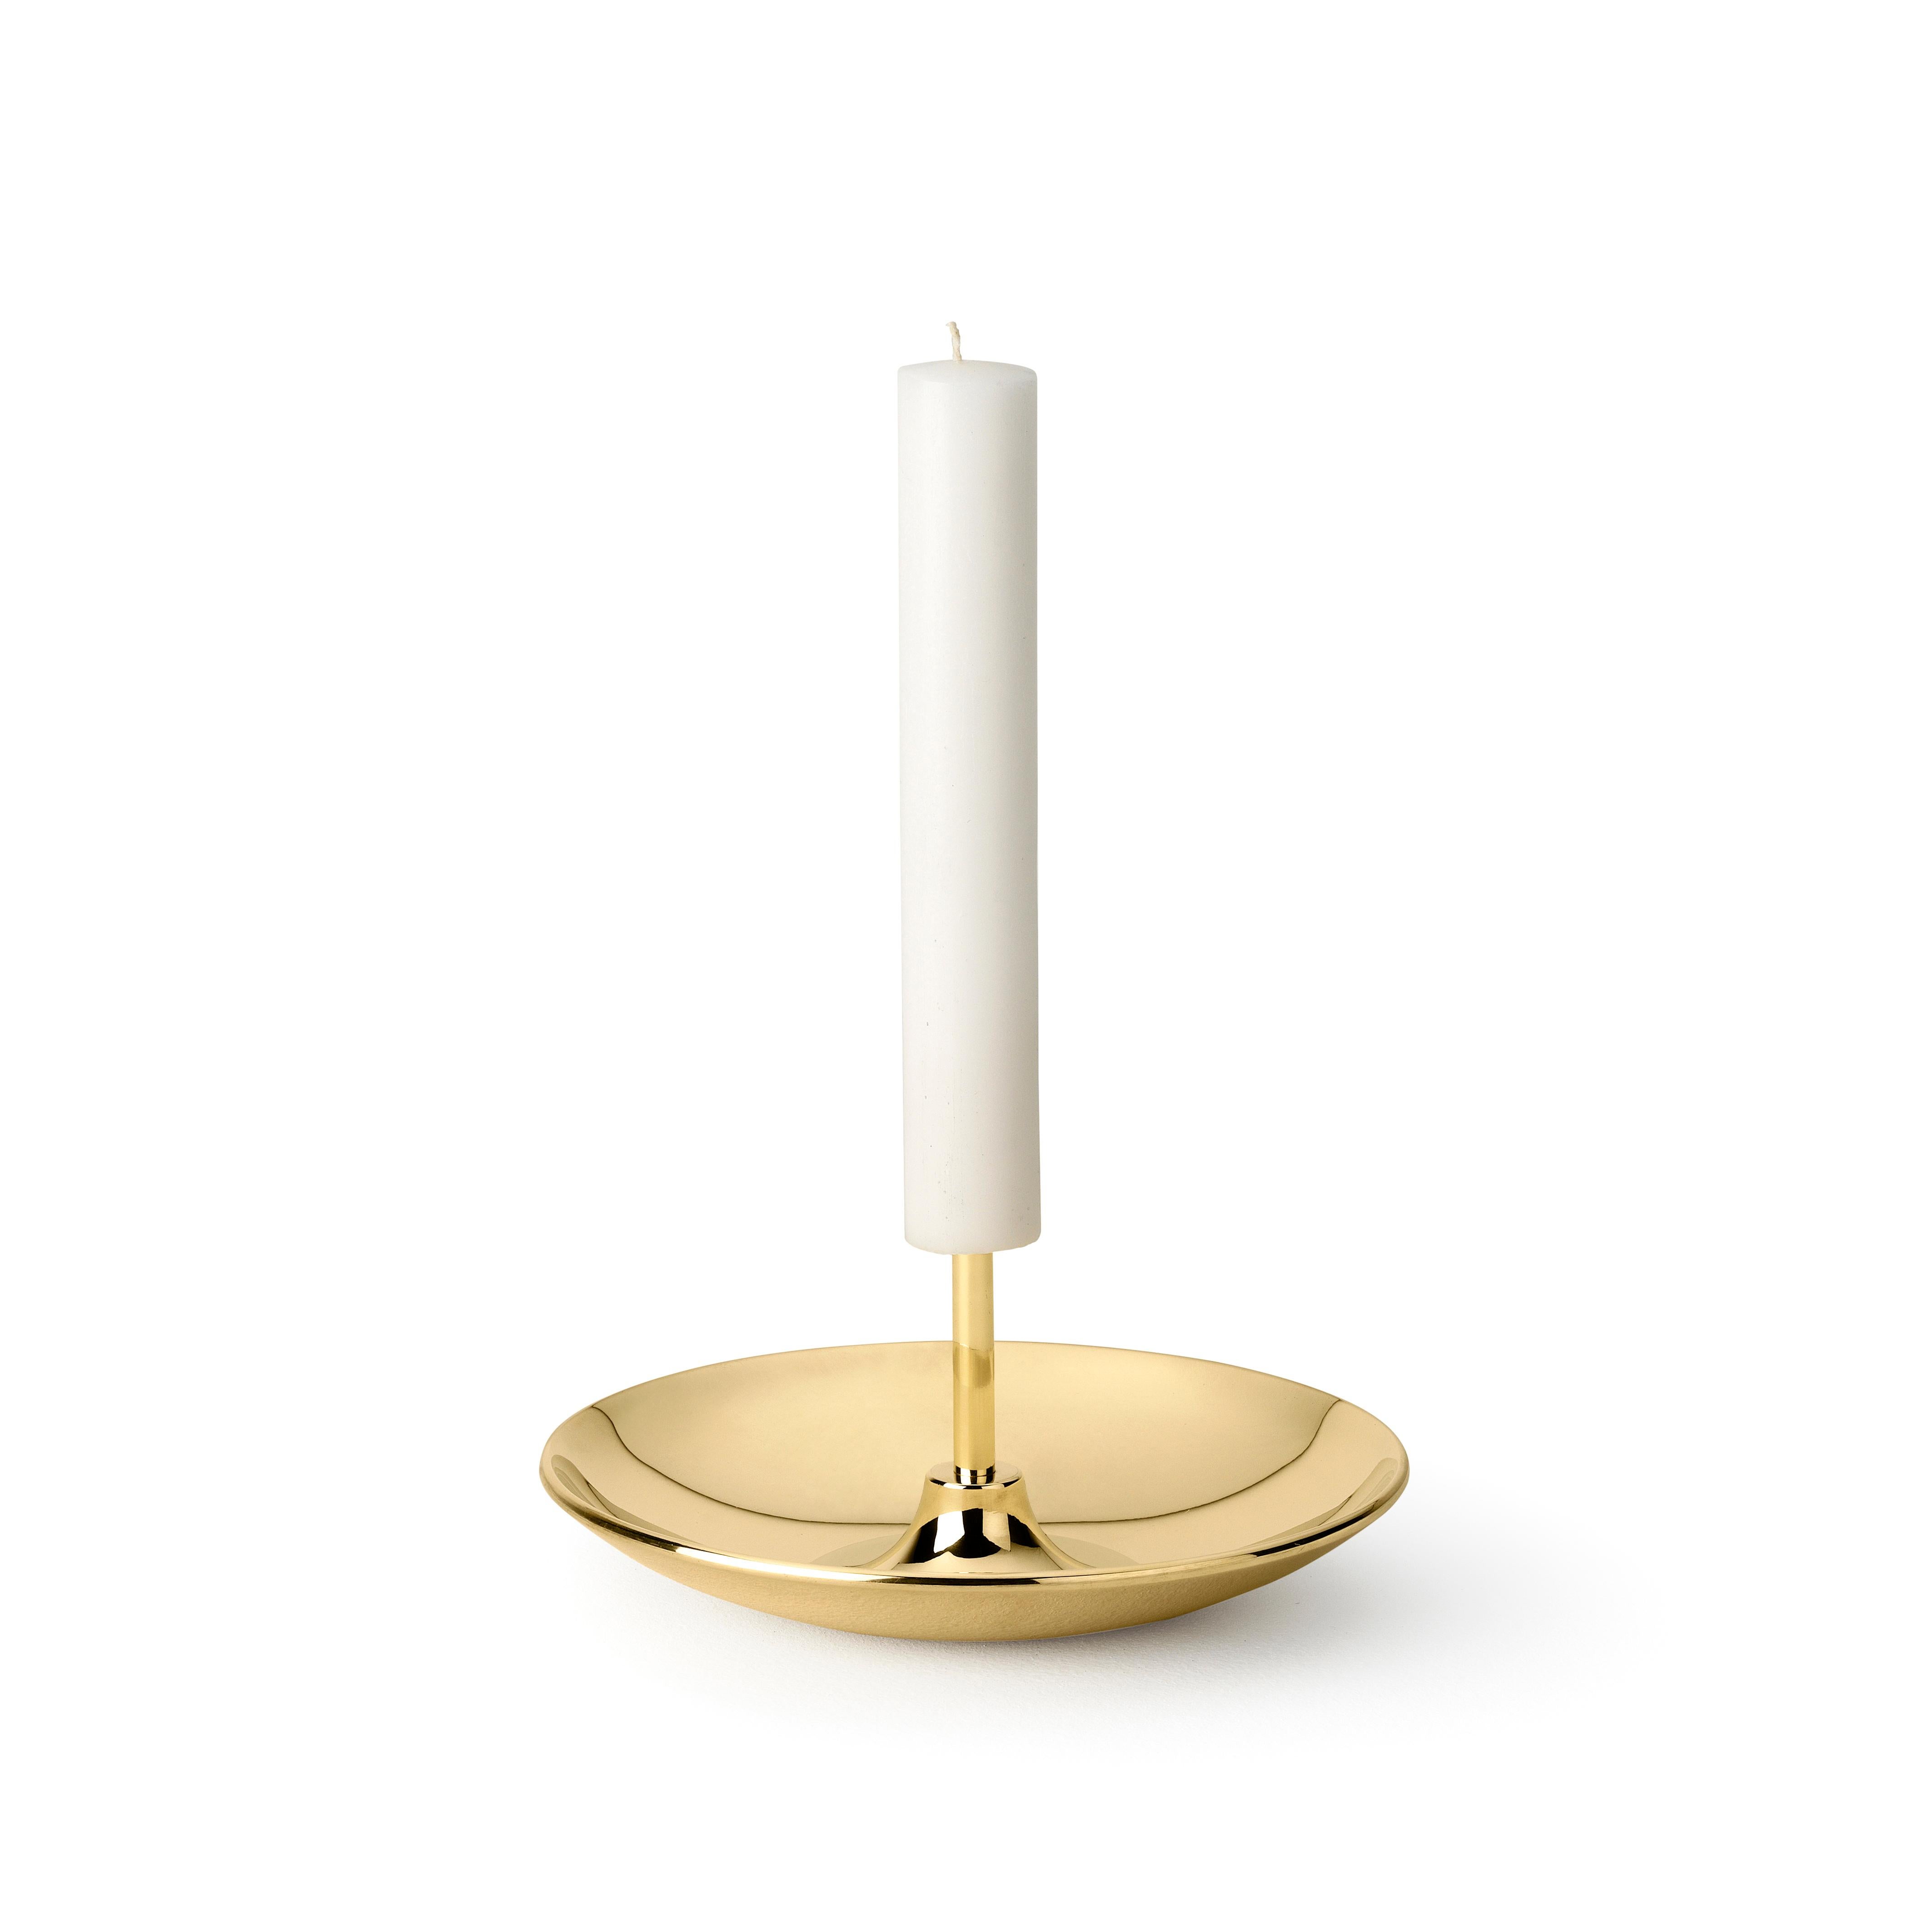 There (push pin) candlestick in wax by Studio Job.

Materials:
Wax
Net weight:
0.7 kg
Dimensions:
Diameter 5 x 39 height cm.